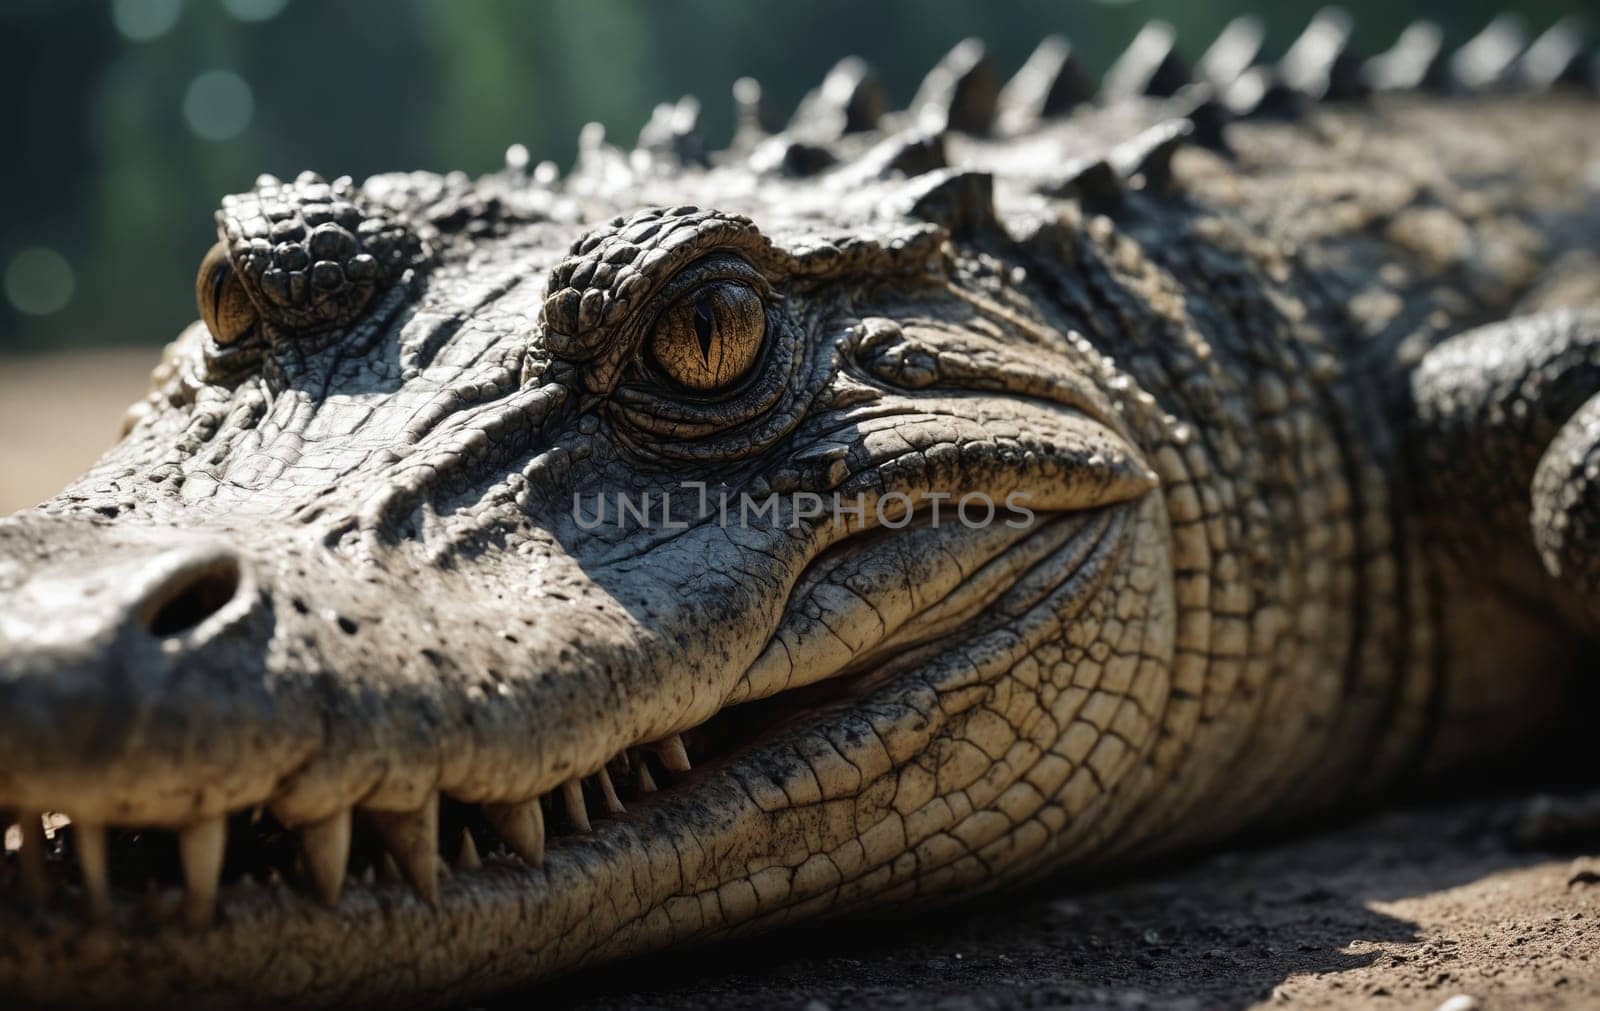 A closeup of a terrestrial reptile, the American crocodile, laying on the ground with its mouth open, showcasing its powerful jaws and sharp teeth